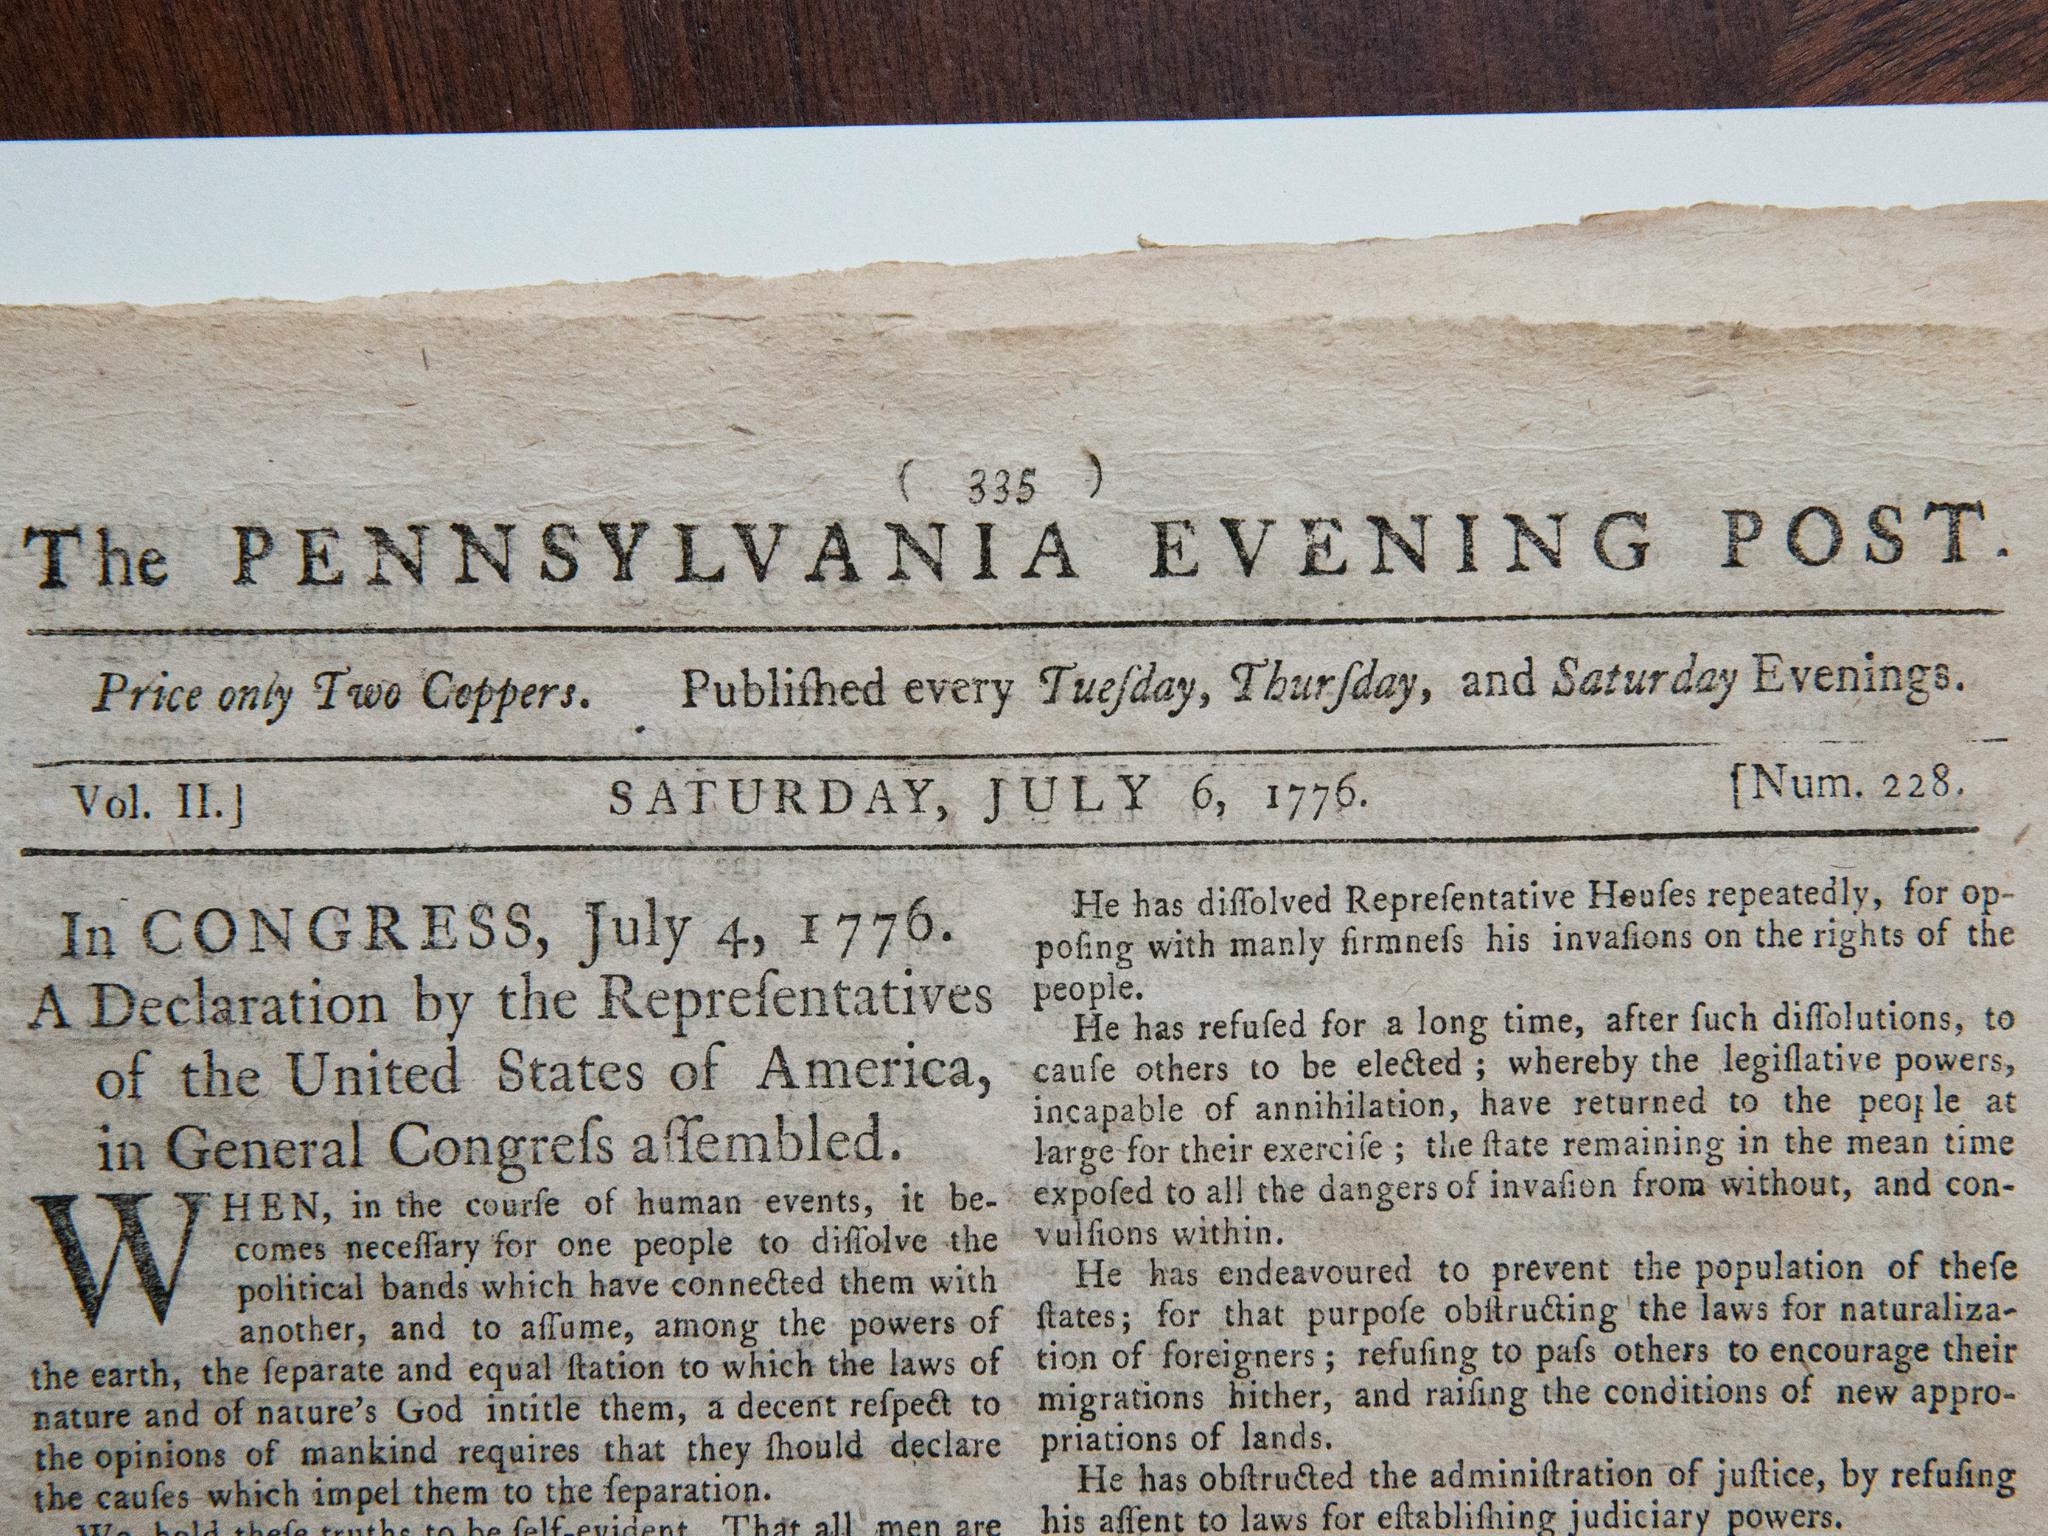 The first known newspaper printing of the Declaration of Independence, printed on 6 July 1776 in The Pennsylvania Evening Post,